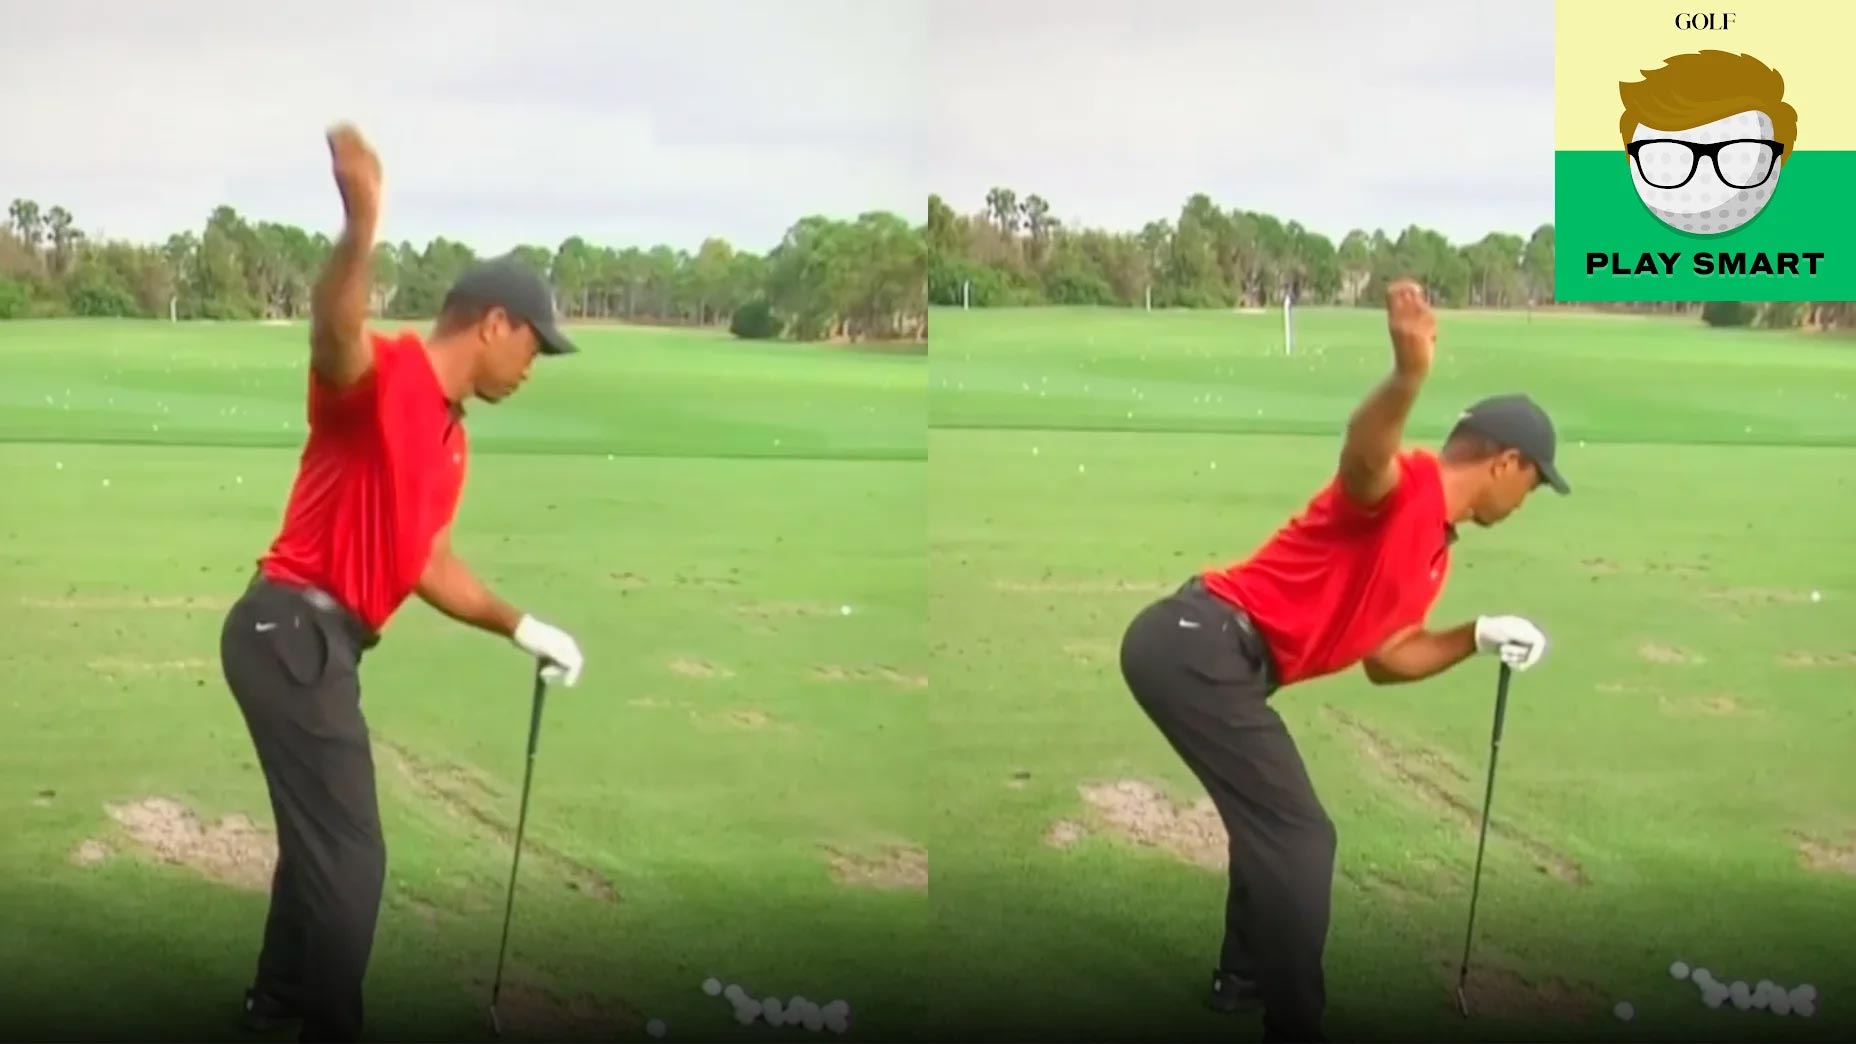 A stylish warmup routine of Tiger Woods Golf SWING 24/7 Golf SWING 24/7